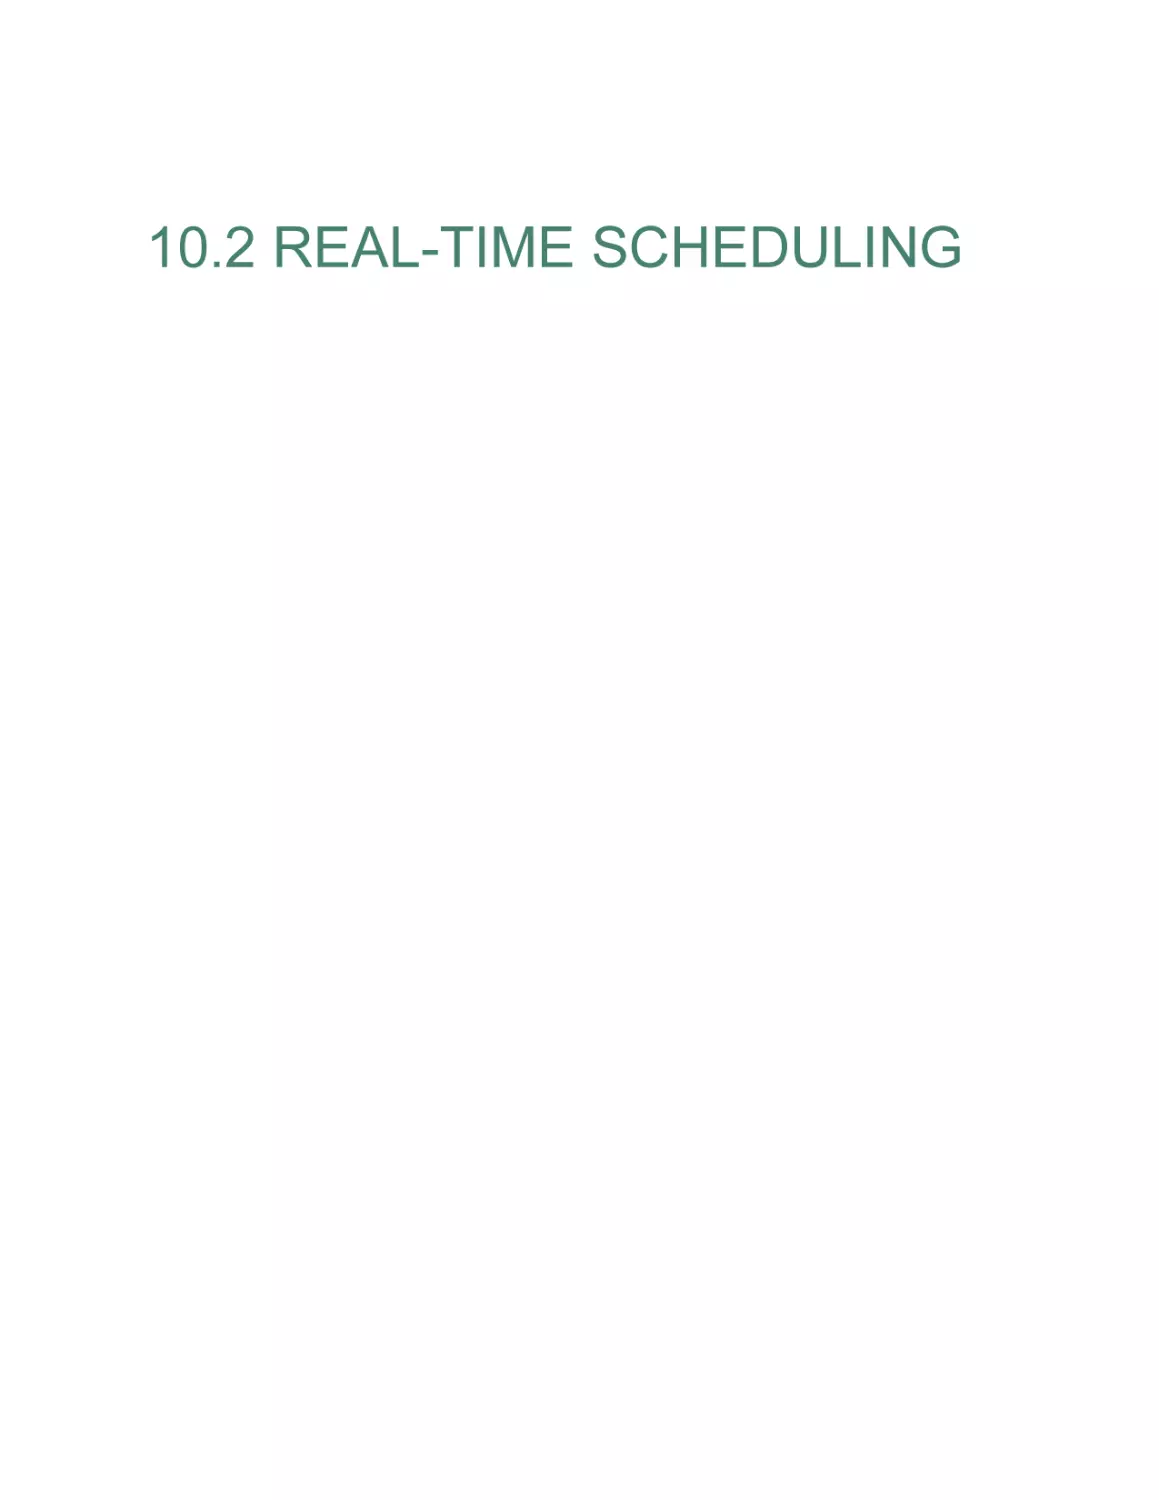 10.2 REAL-TIME SCHEDULING